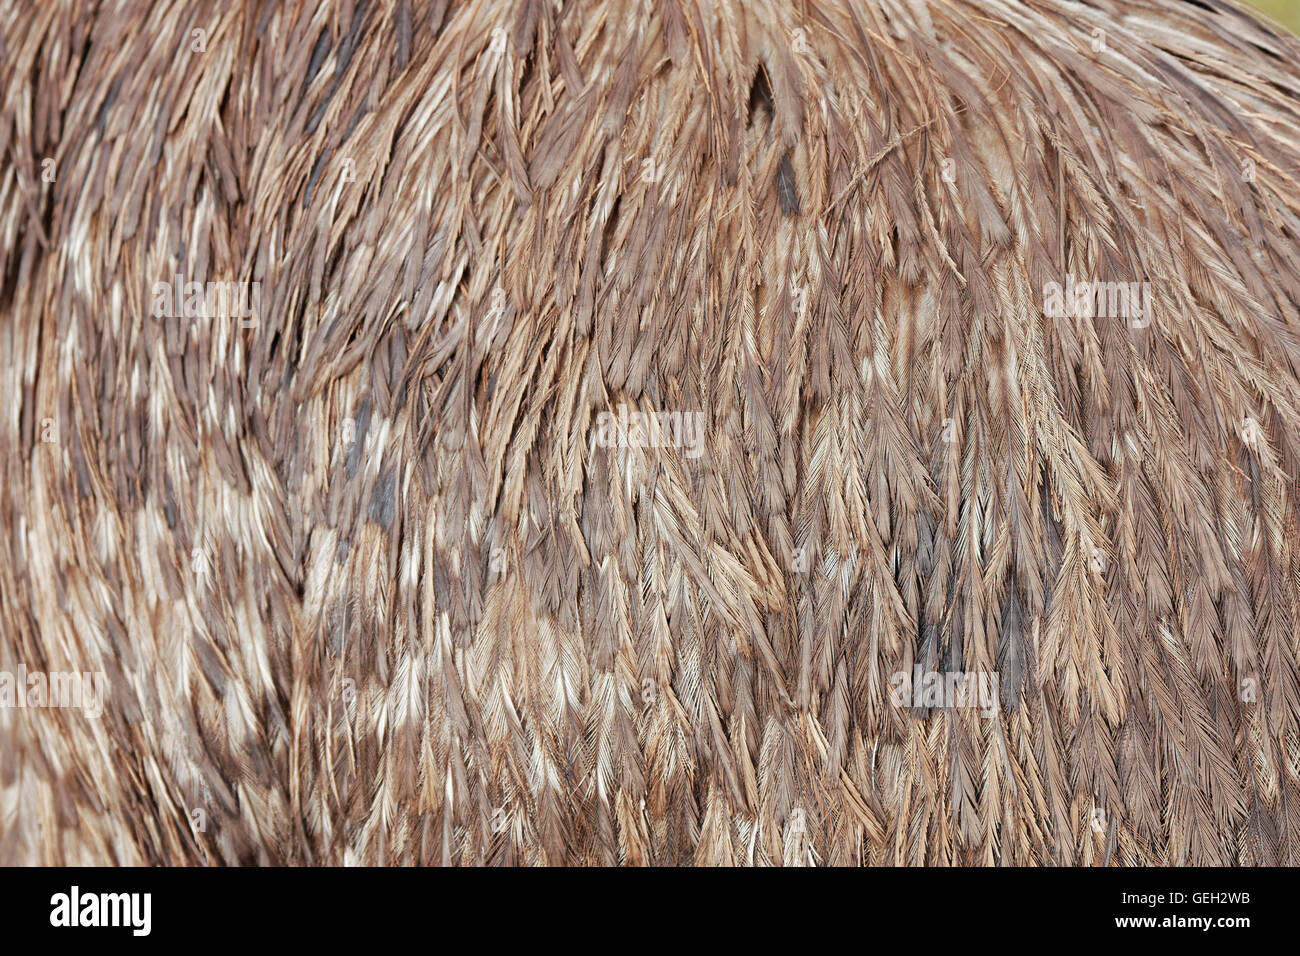 a close up view of emu feathers Stock Photo